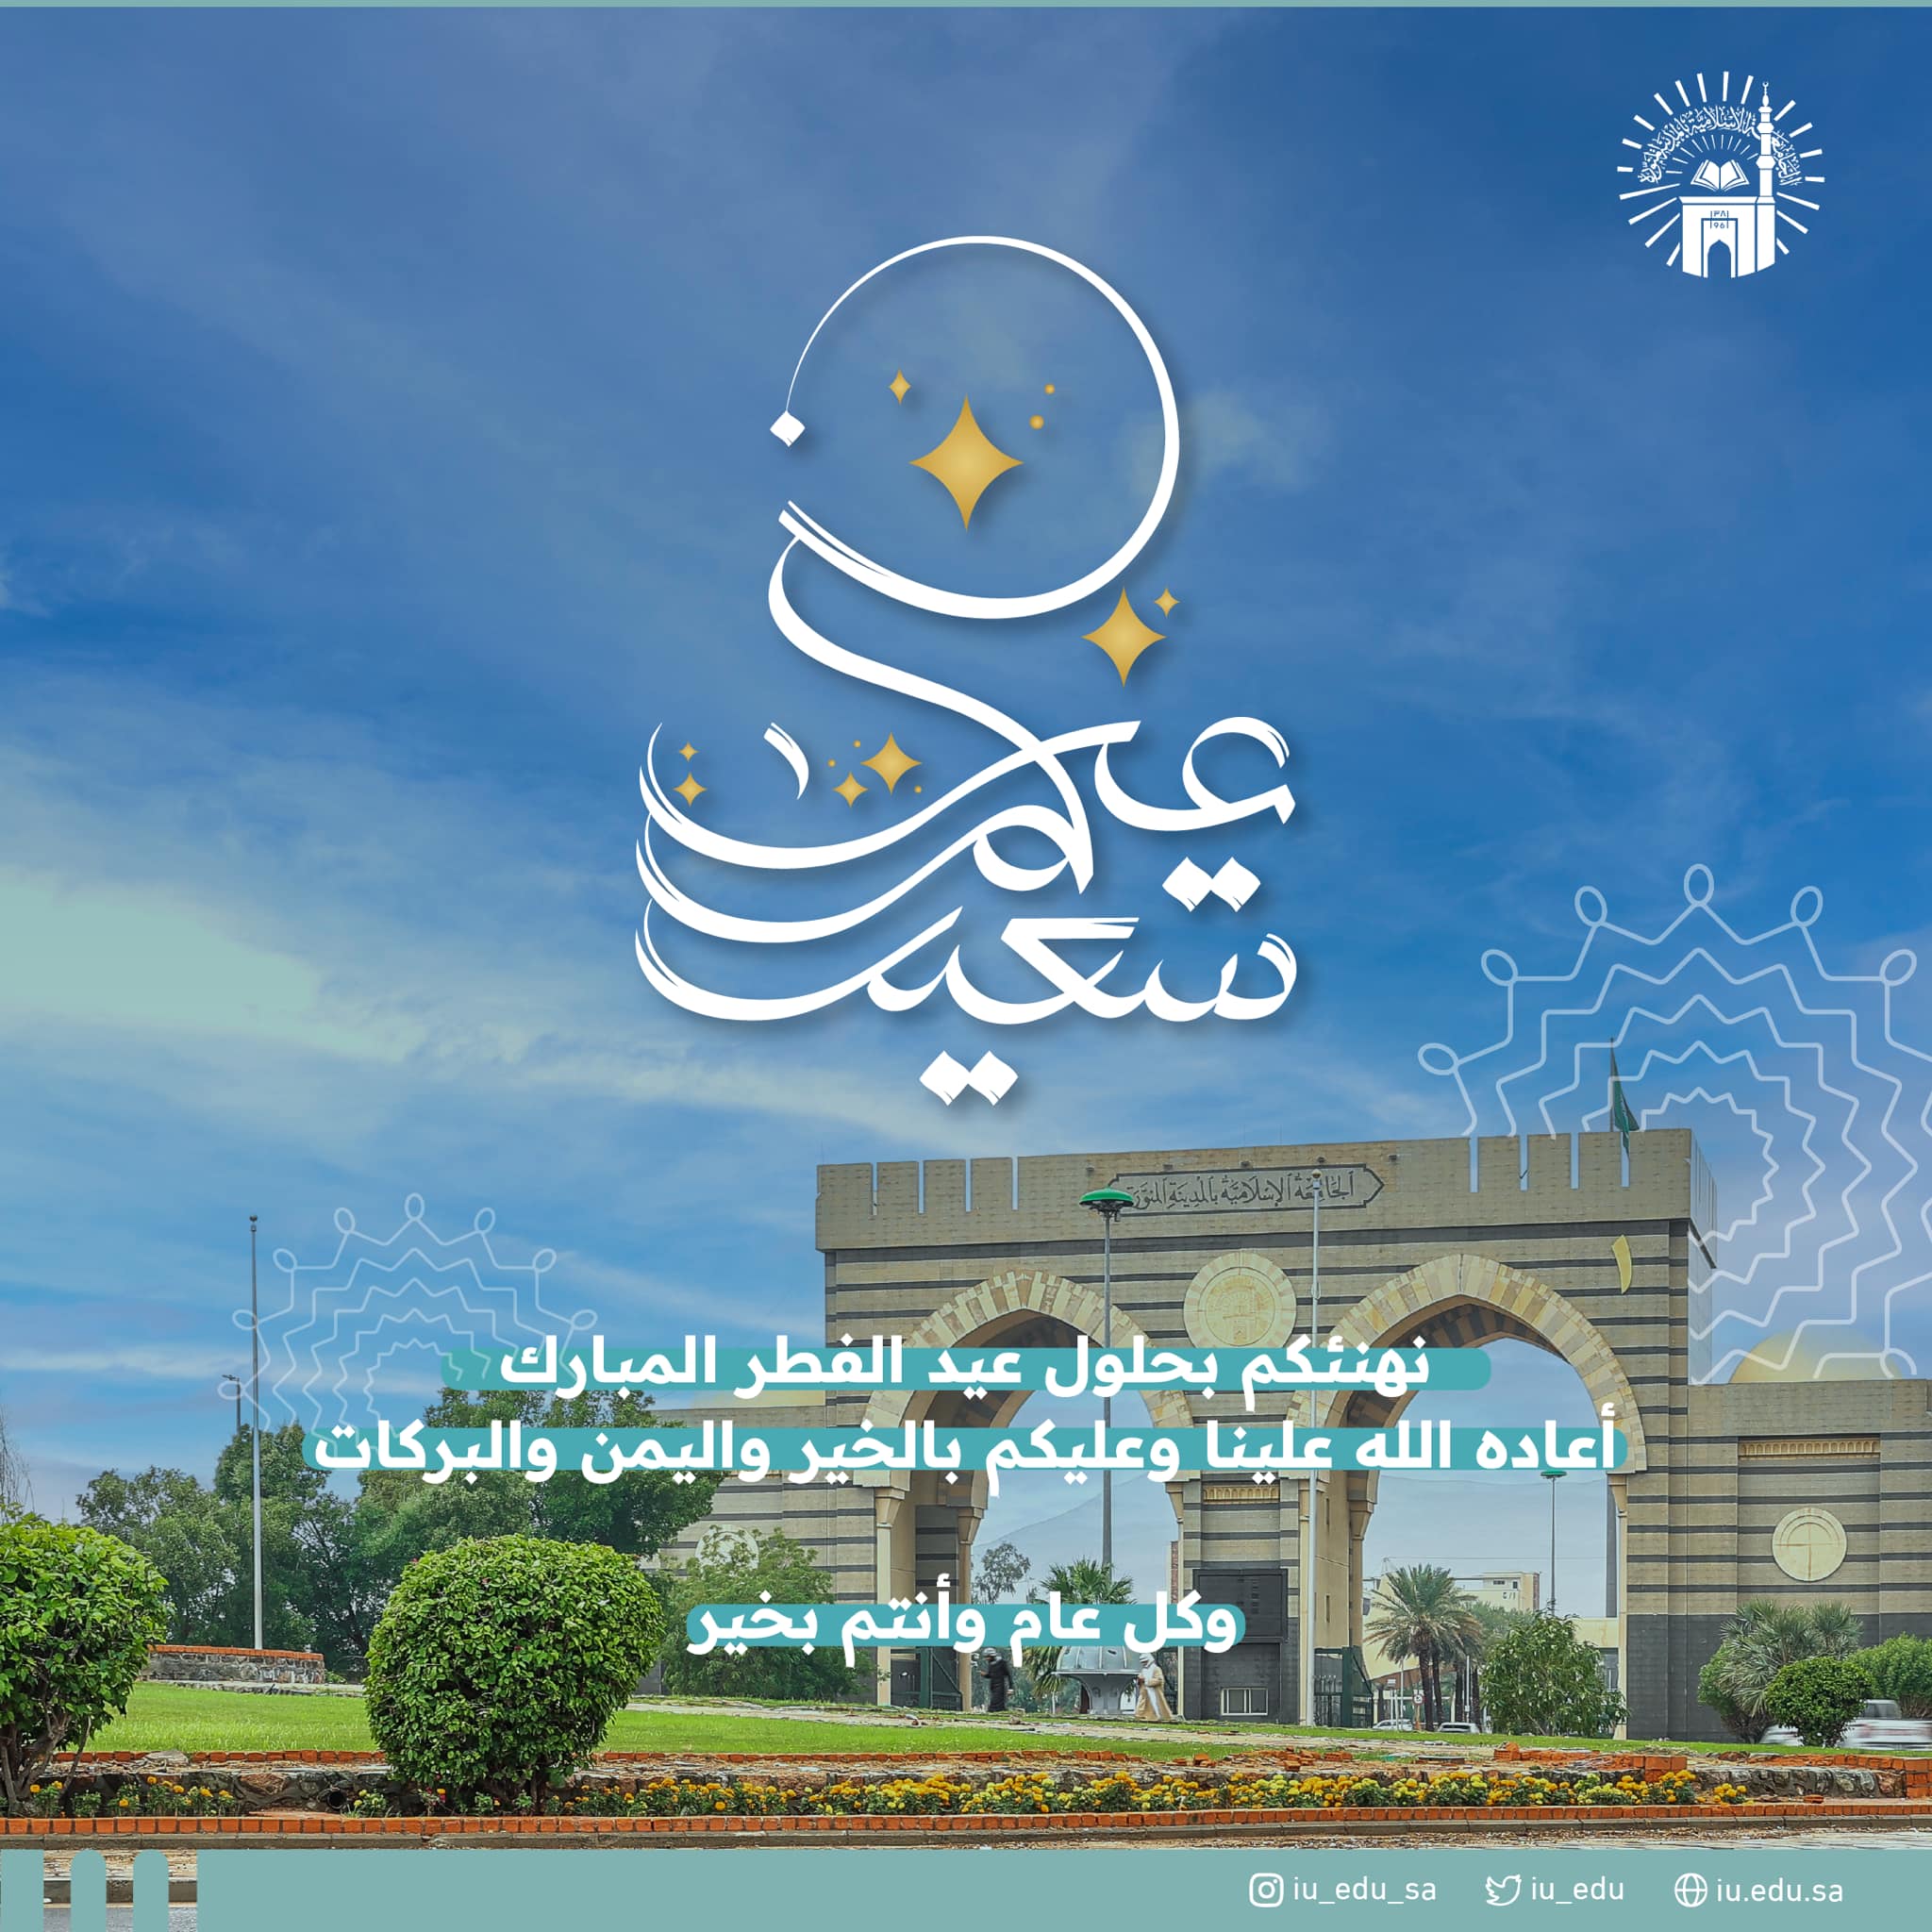 Islamic University of Madinah Rankings, Fees & Courses Details Top